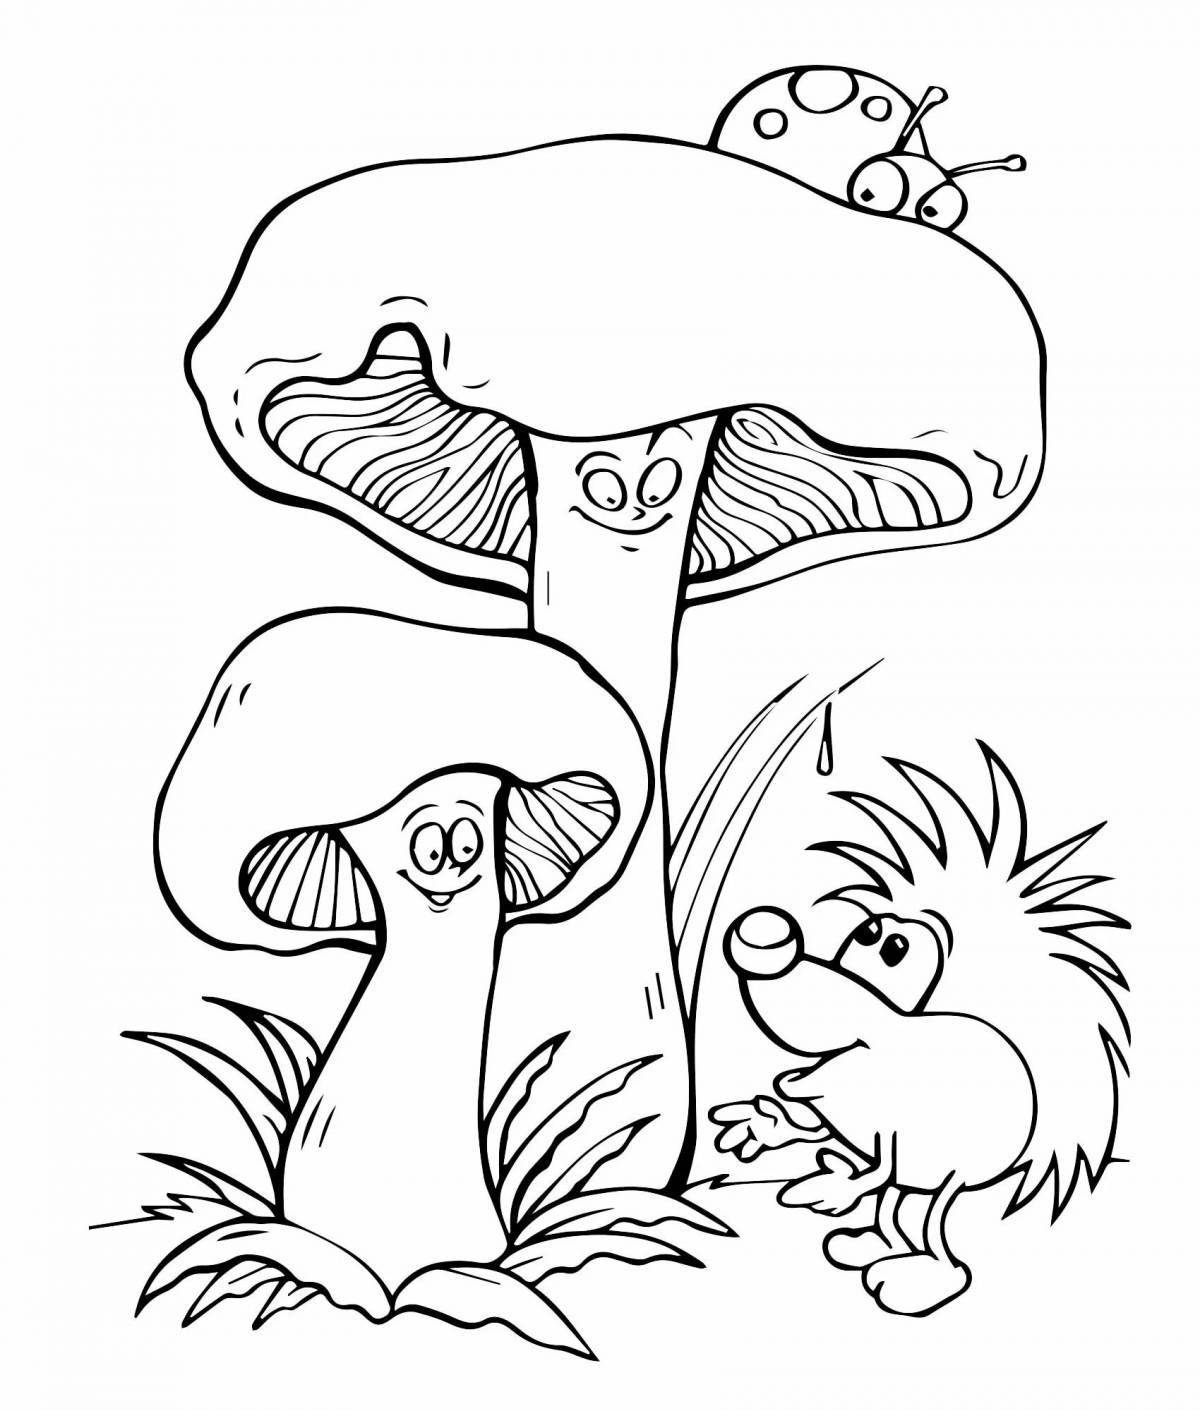 Glitter mushroom coloring pages for 6-7 year olds